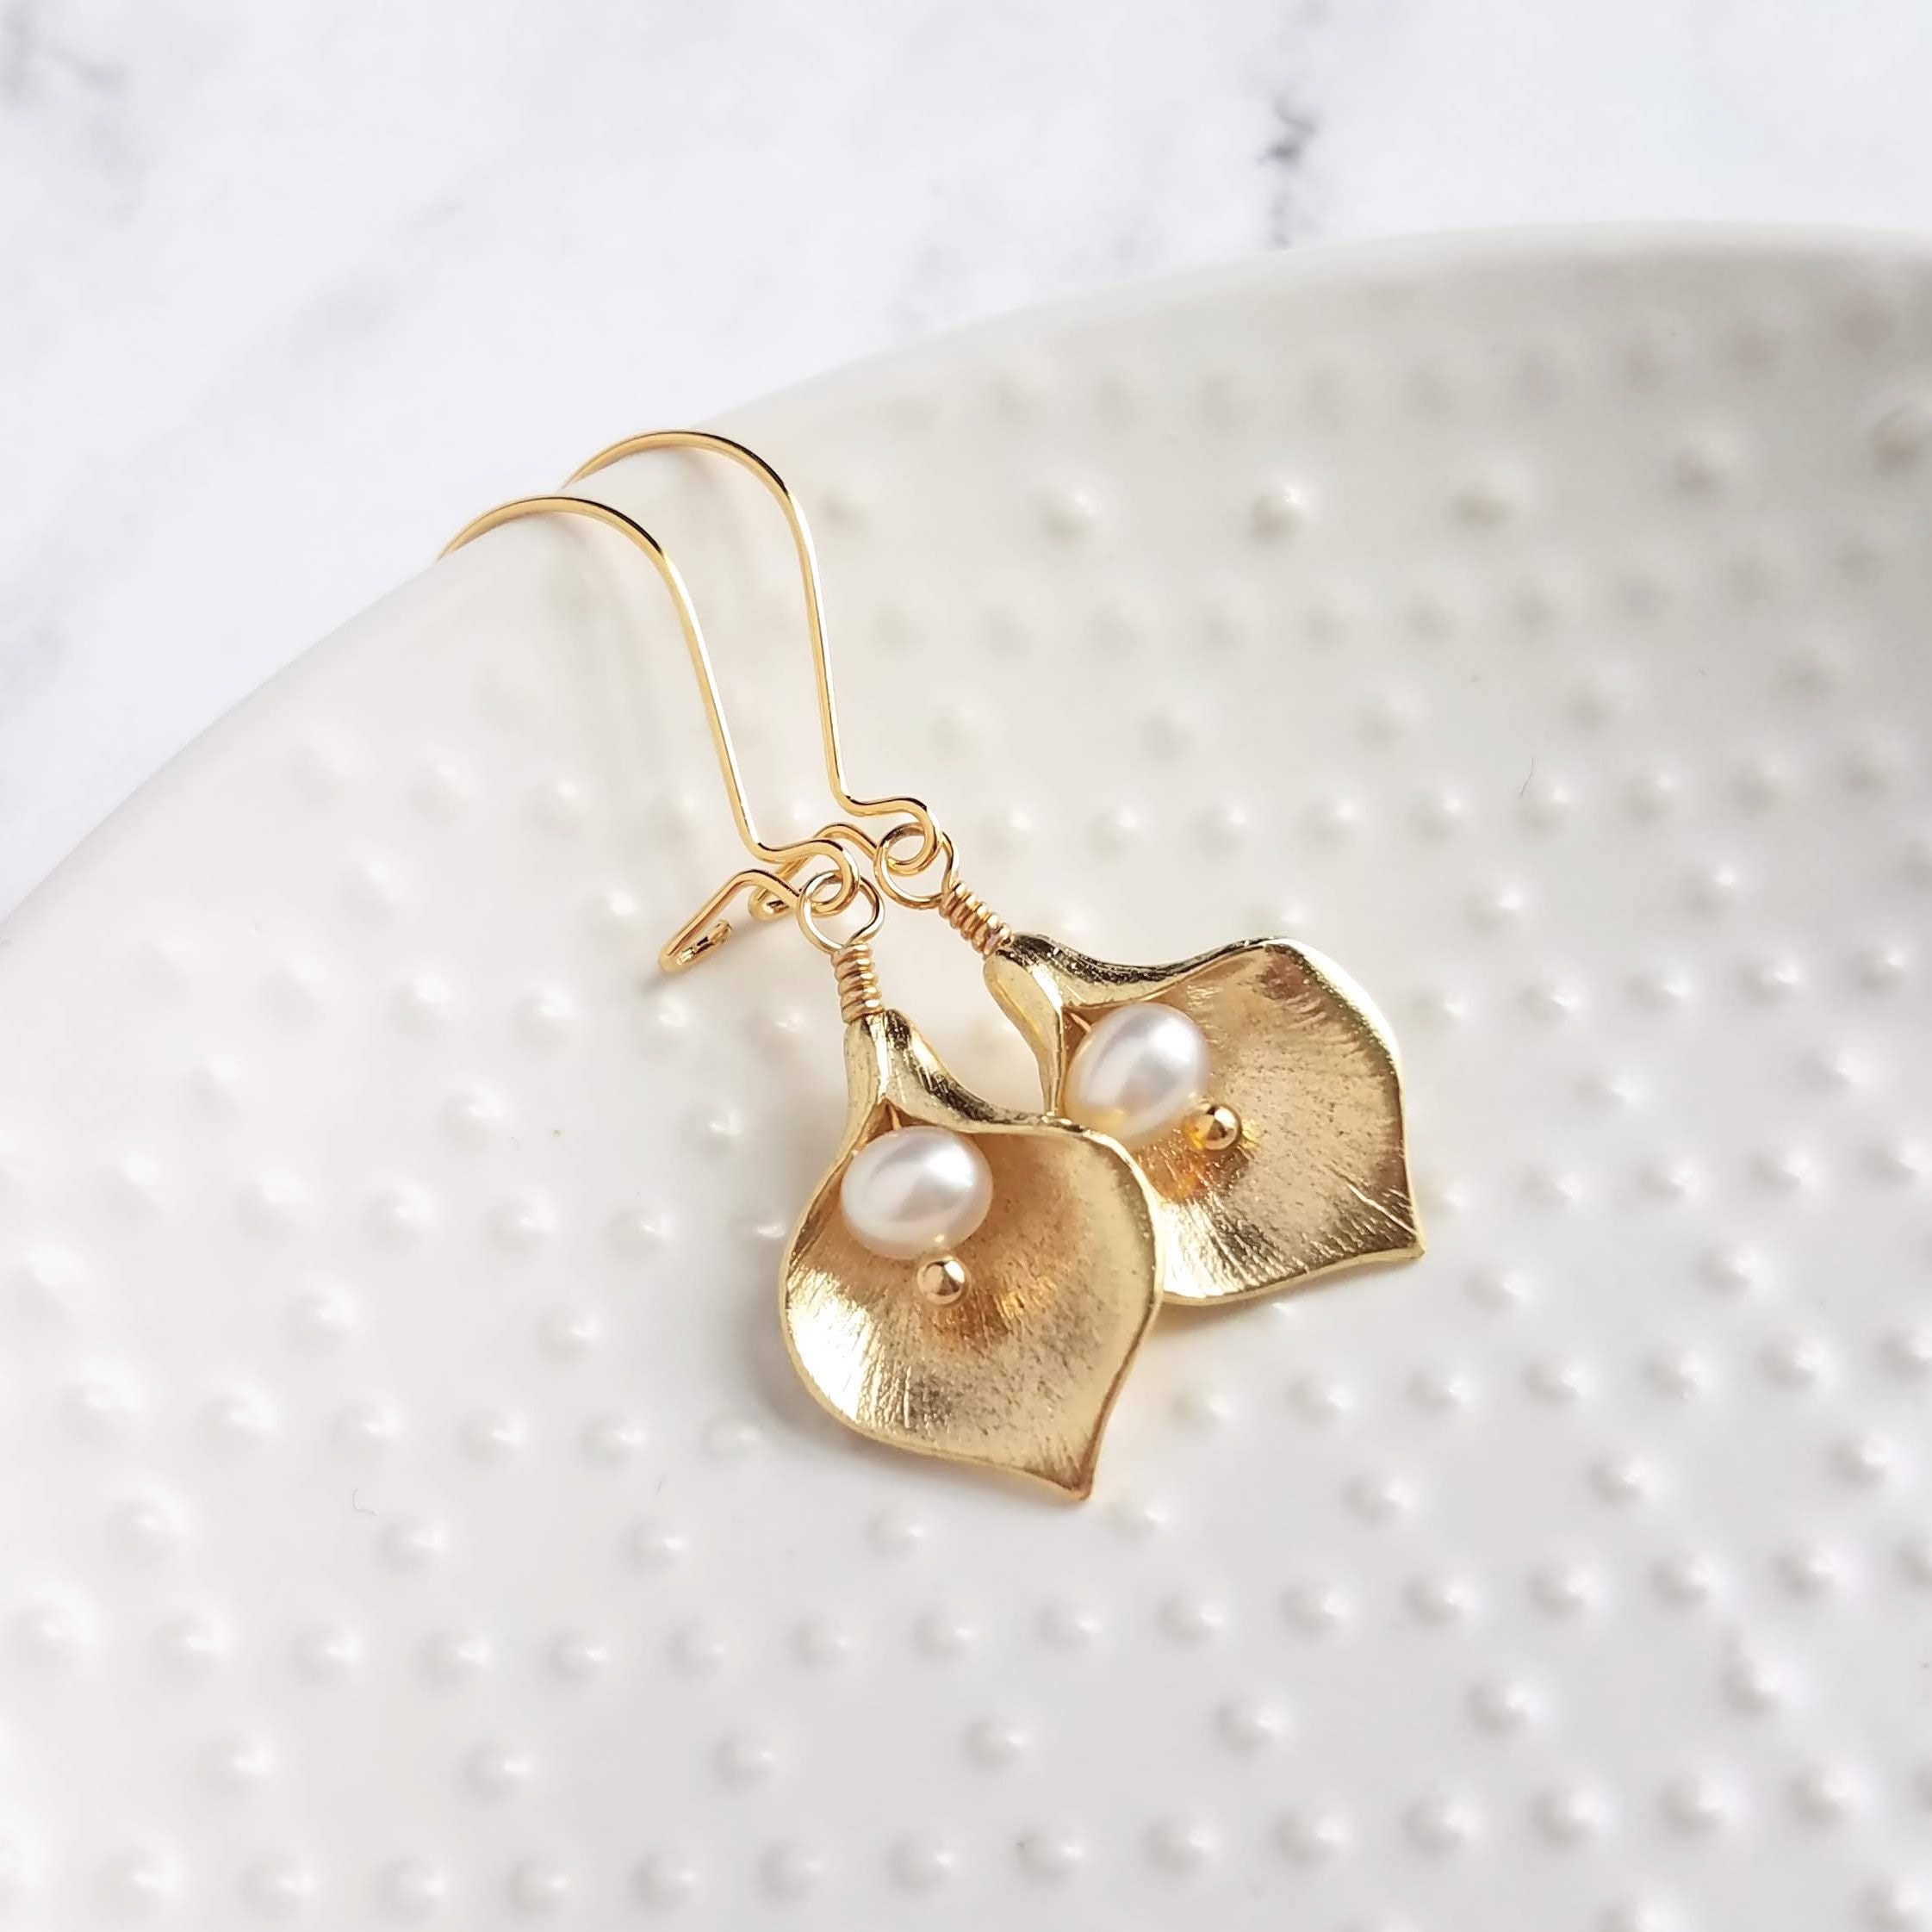 Calla Lily Earrings Small Gold Lilies Freshwater Pearls - Etsy Denmark